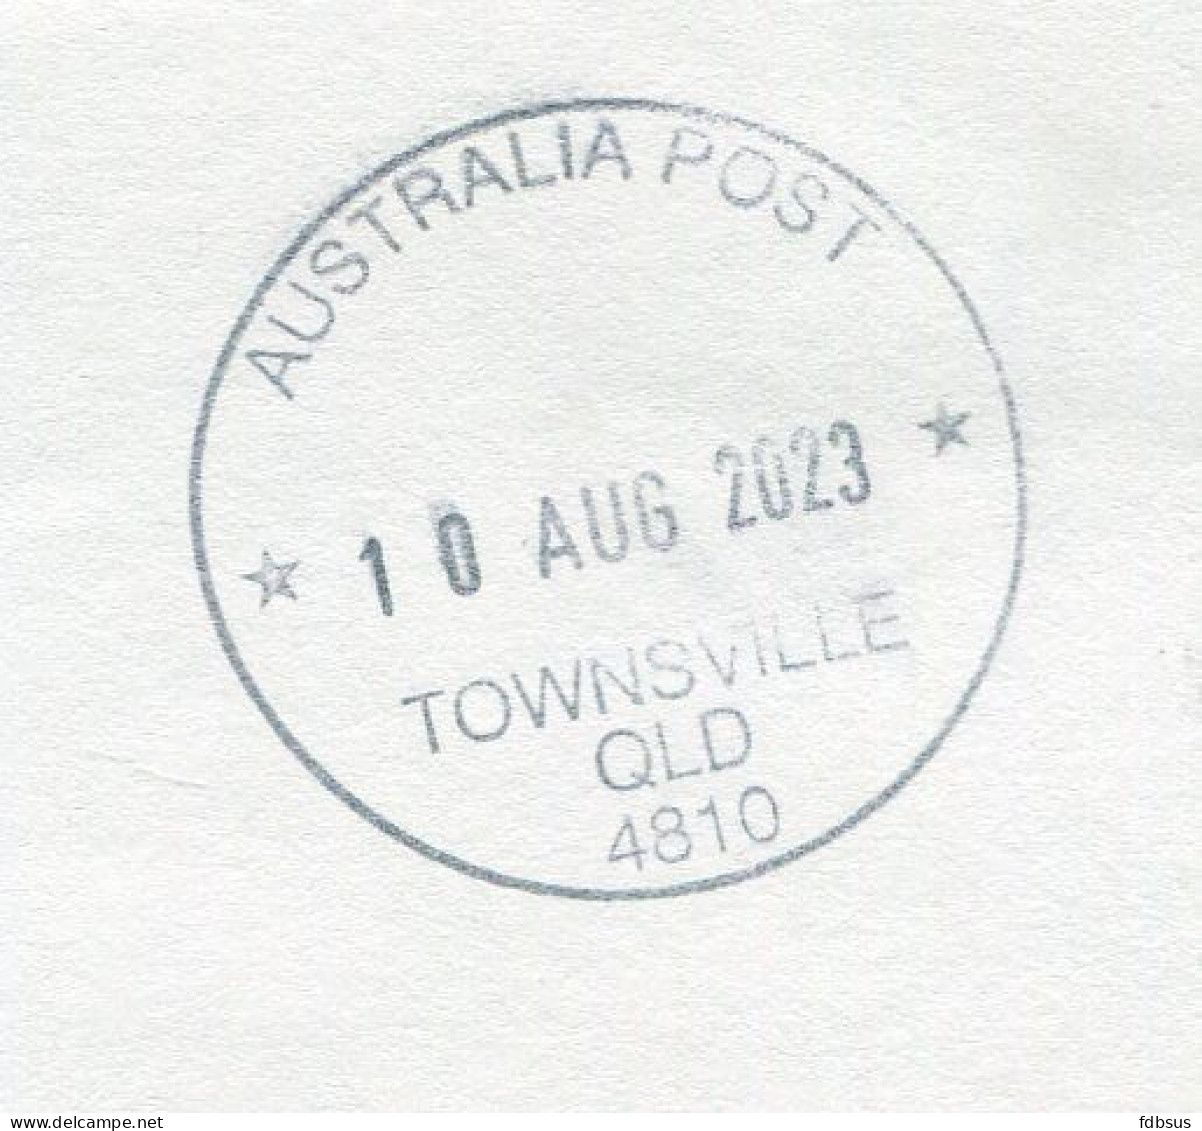 Aug. 2023 Cover From Belgium To Townsville Australia - Returned Back 23/2/2024 - See Postal Markings RTS - Australia Pos - Briefe U. Dokumente